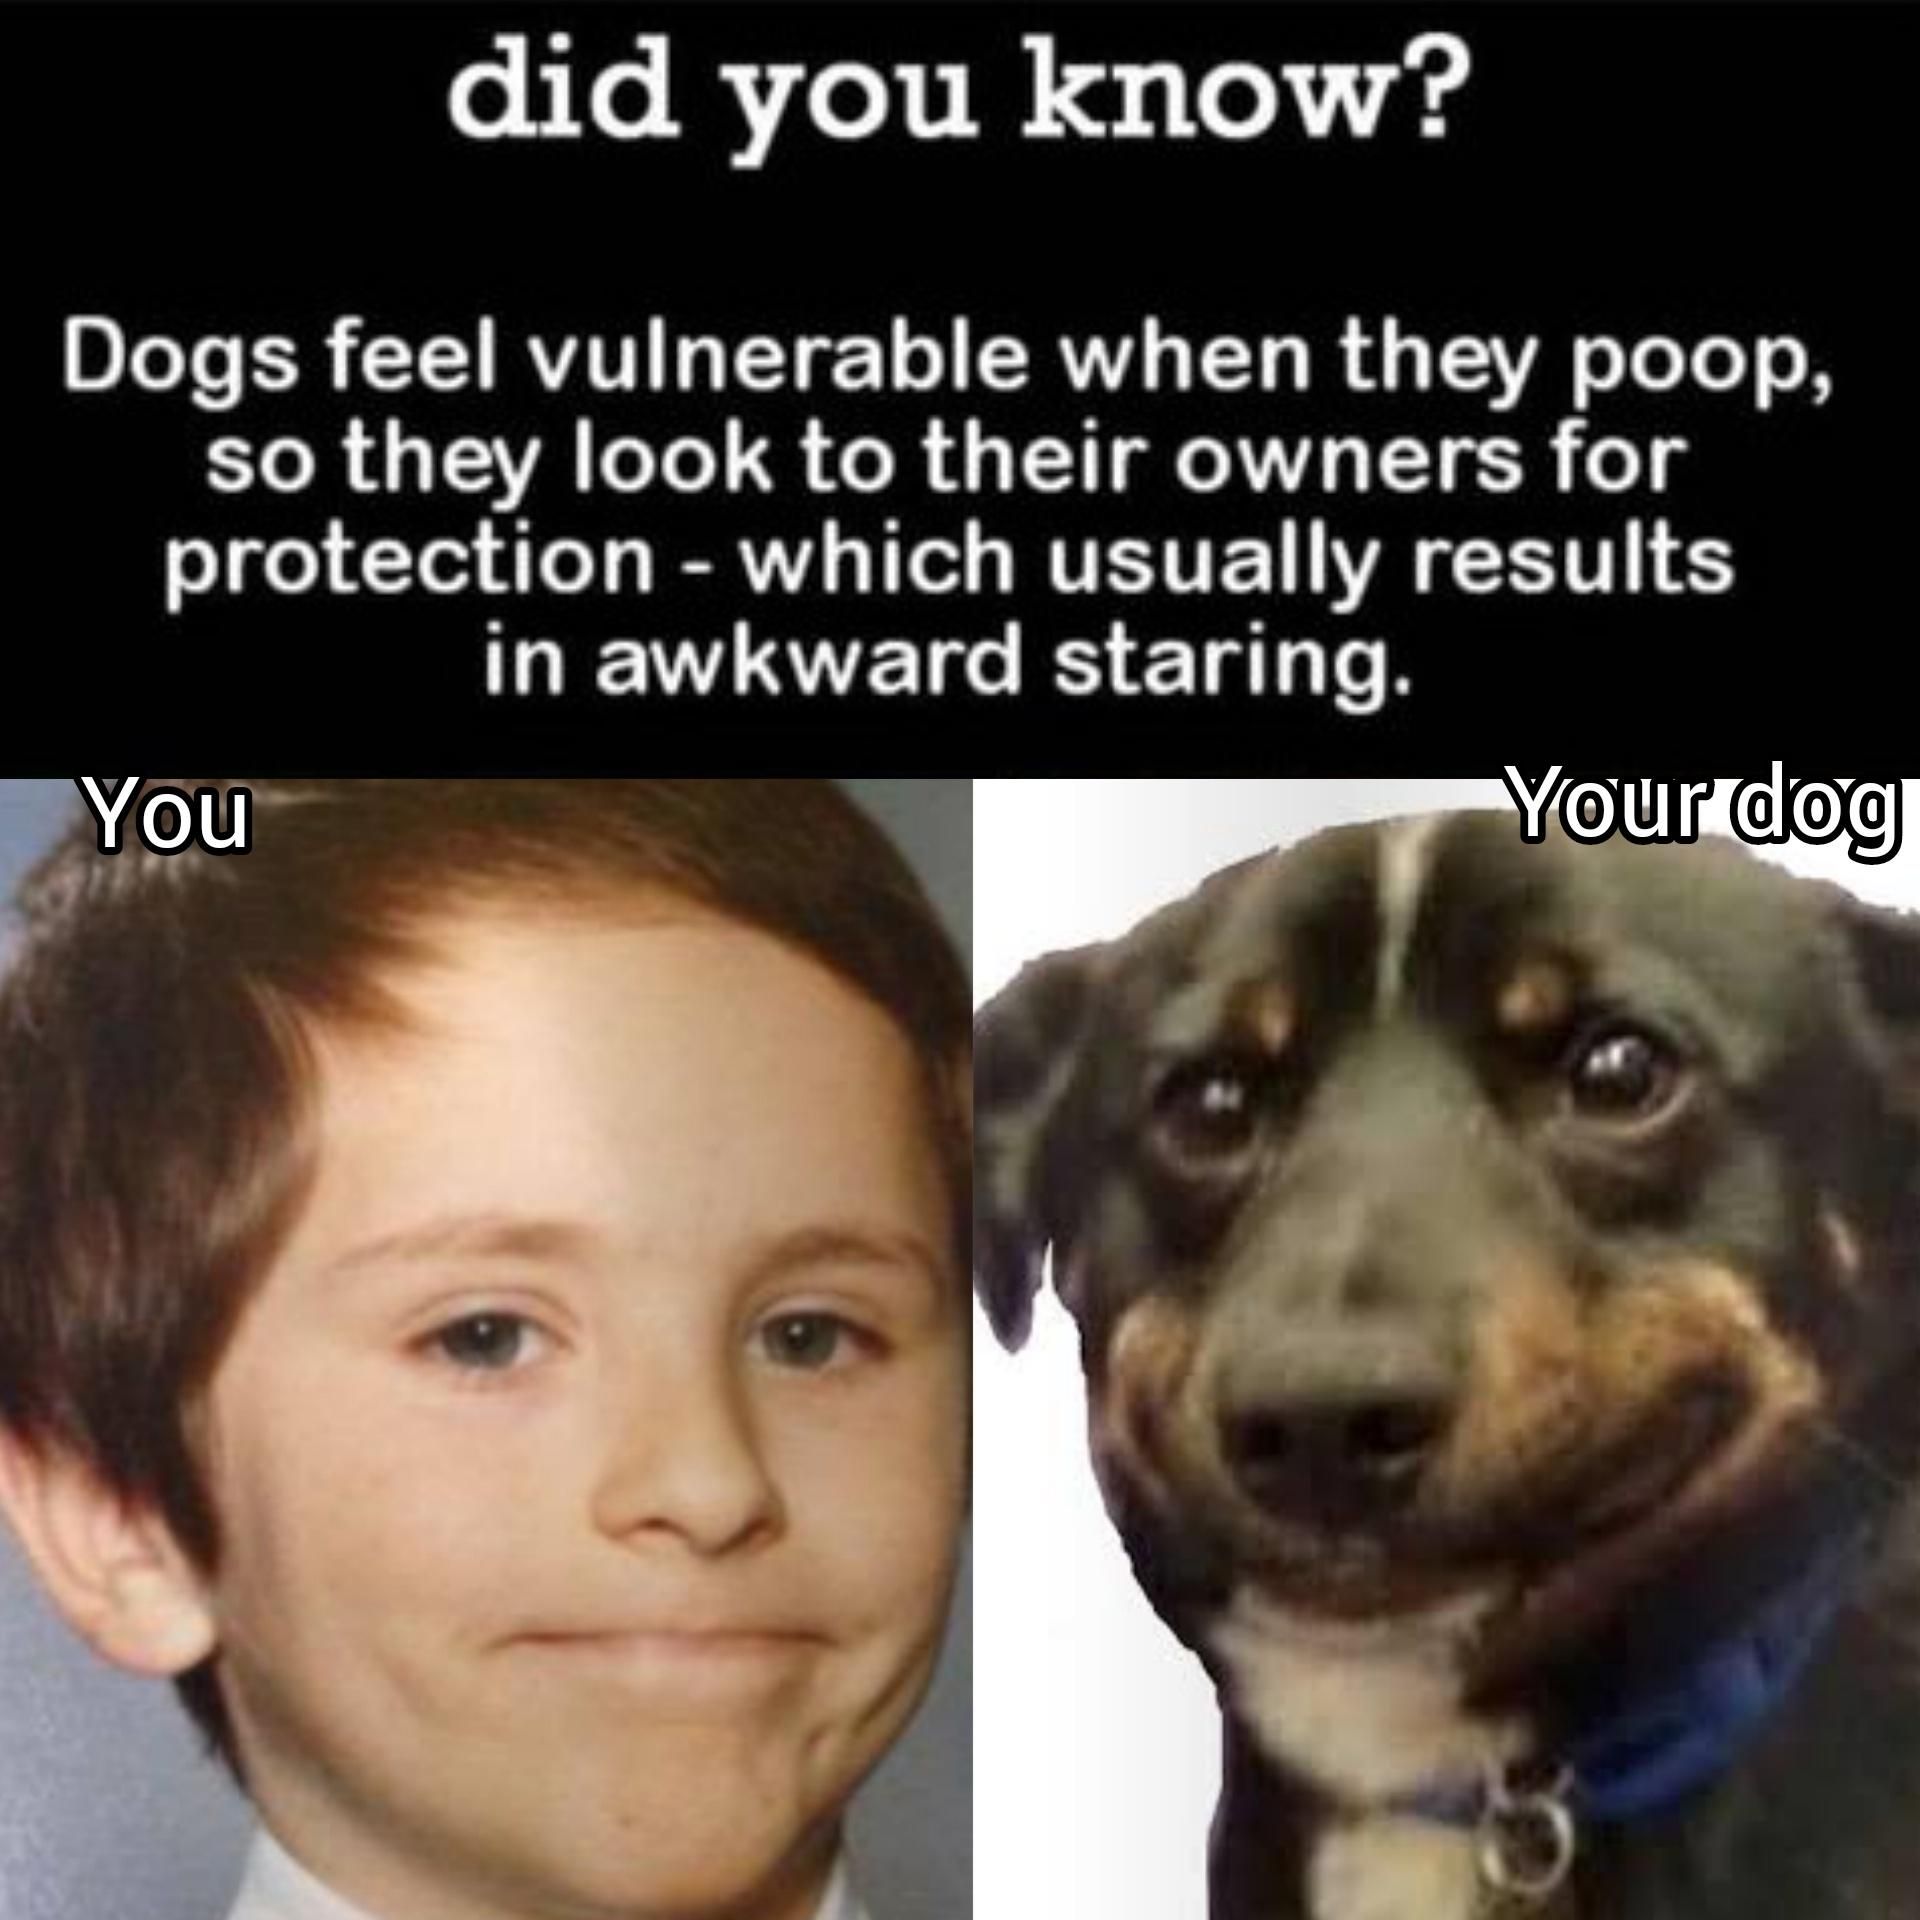 Protec the pooping good boi